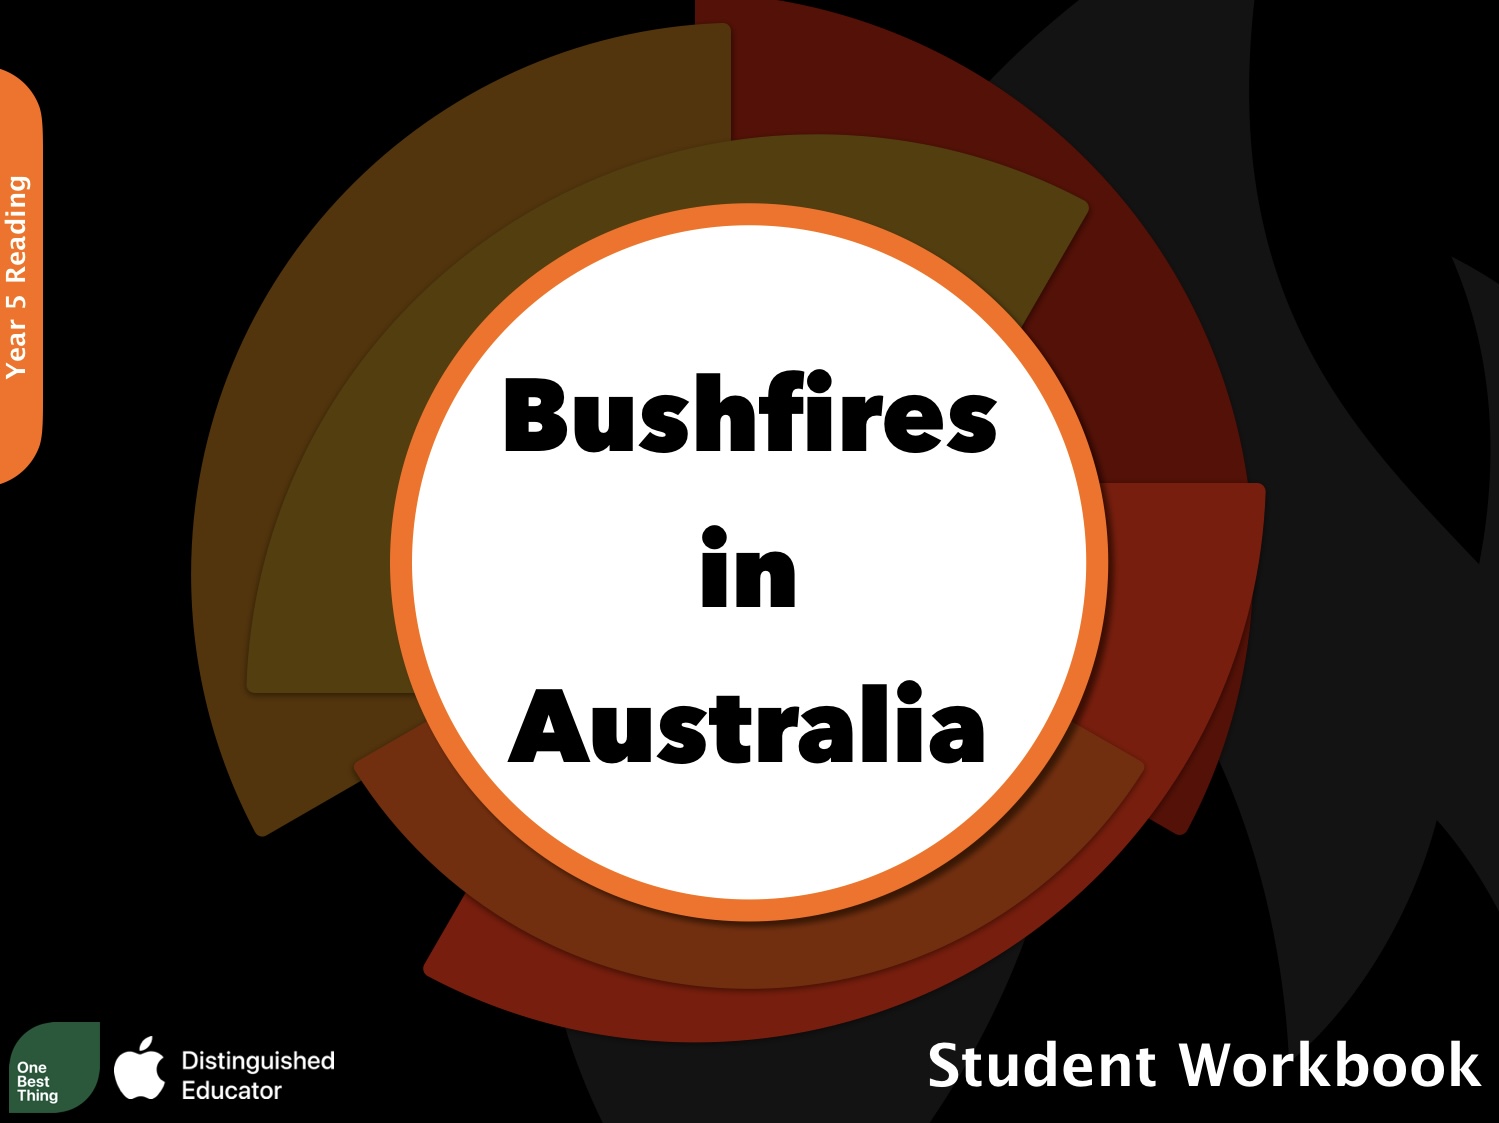 Cover Page for Student Digital Workbook in the Pages app. Titled Bushfires in Australia, Student Workbook